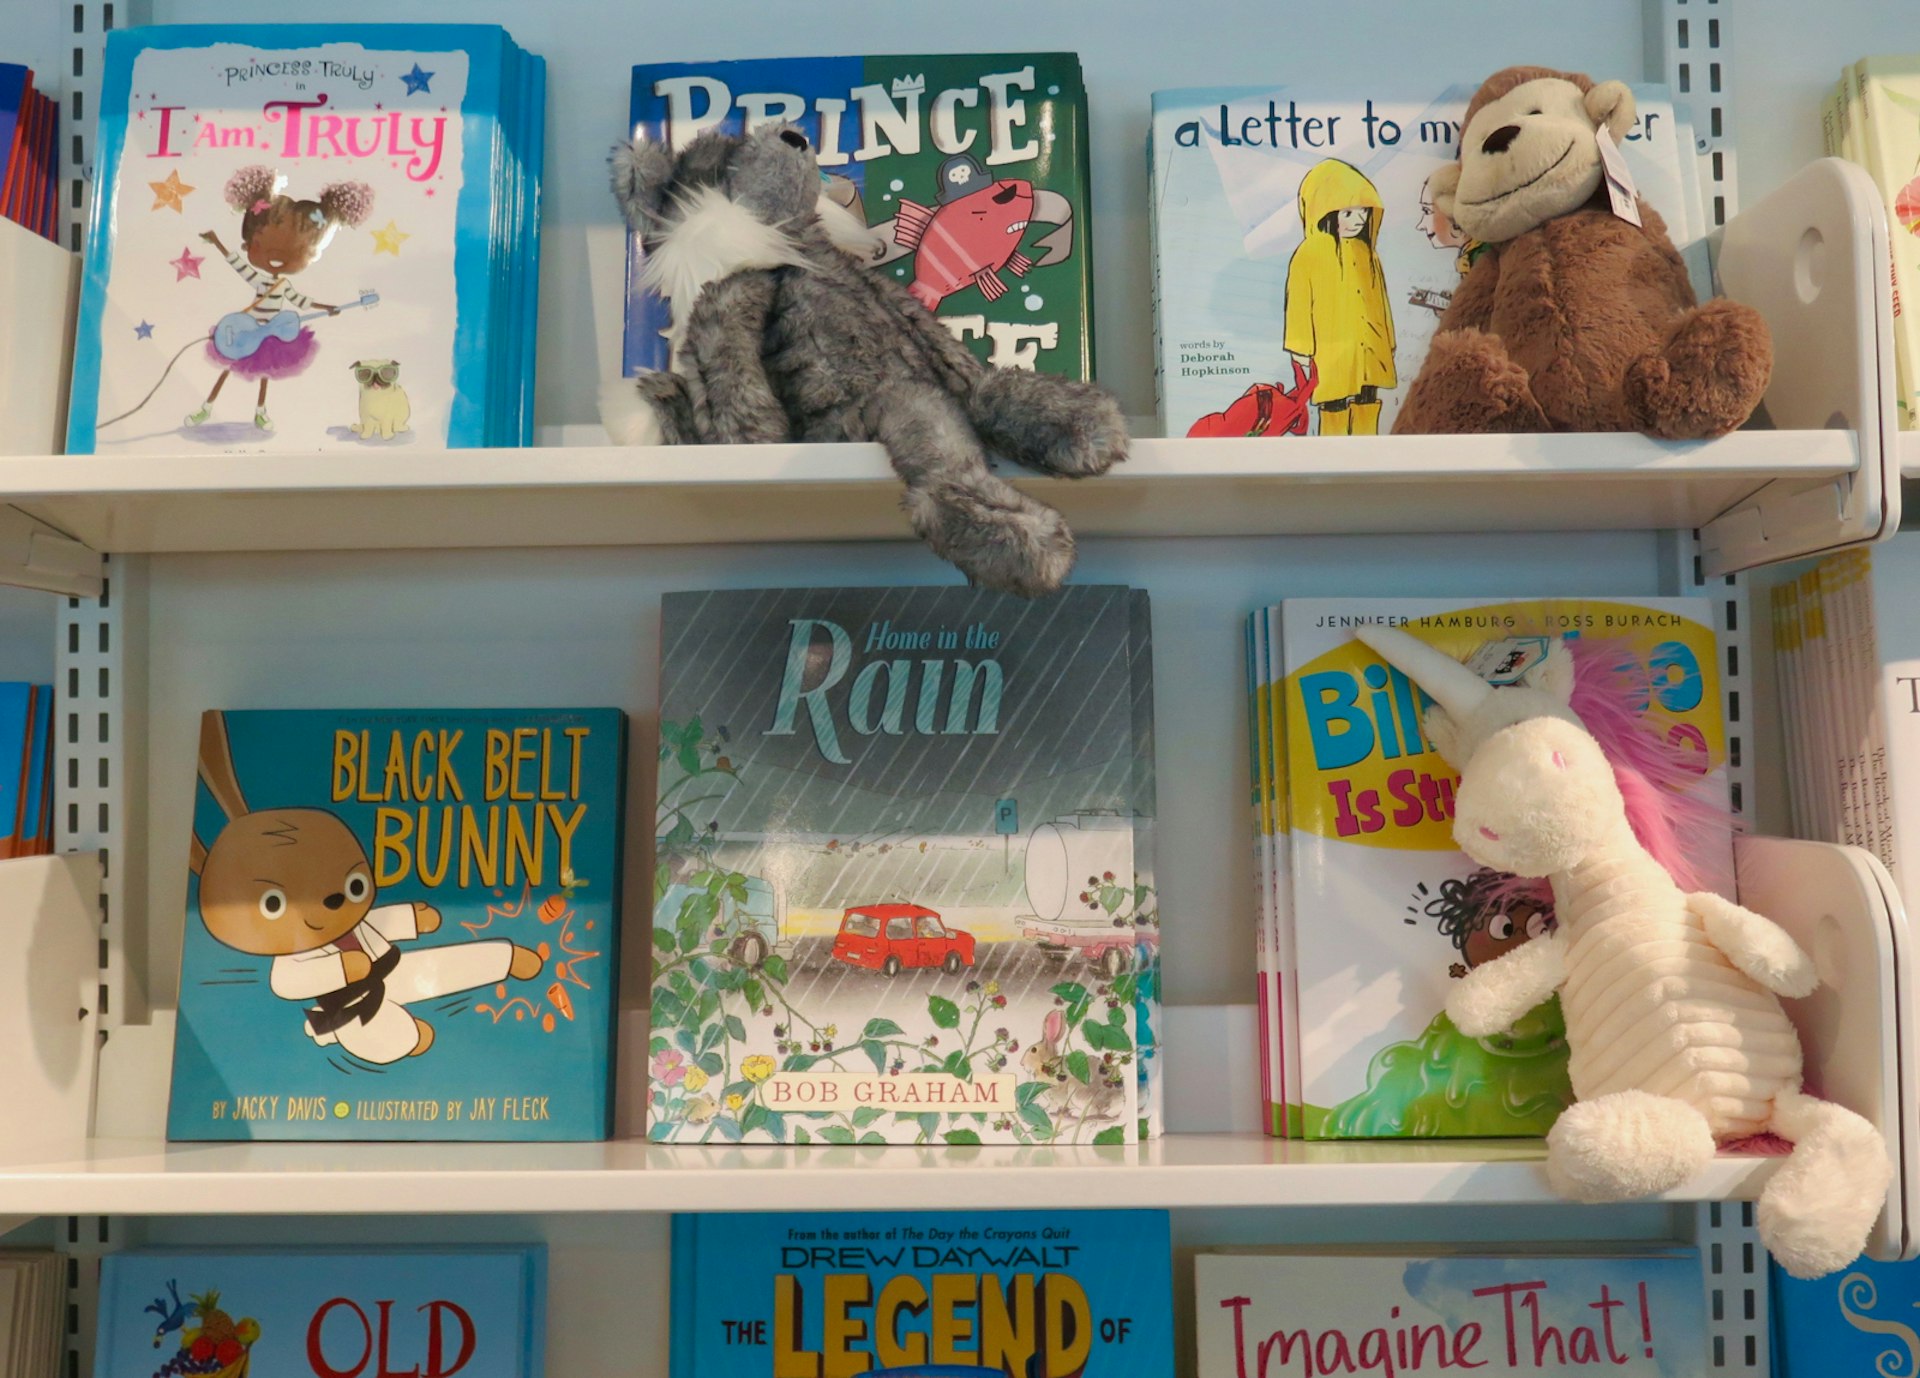 Children's books at Kidsbooks in Vancouver. Titles include Black Belt Bunny, Home in the Rain, and I am Truly; Vancouver's best bookstores.